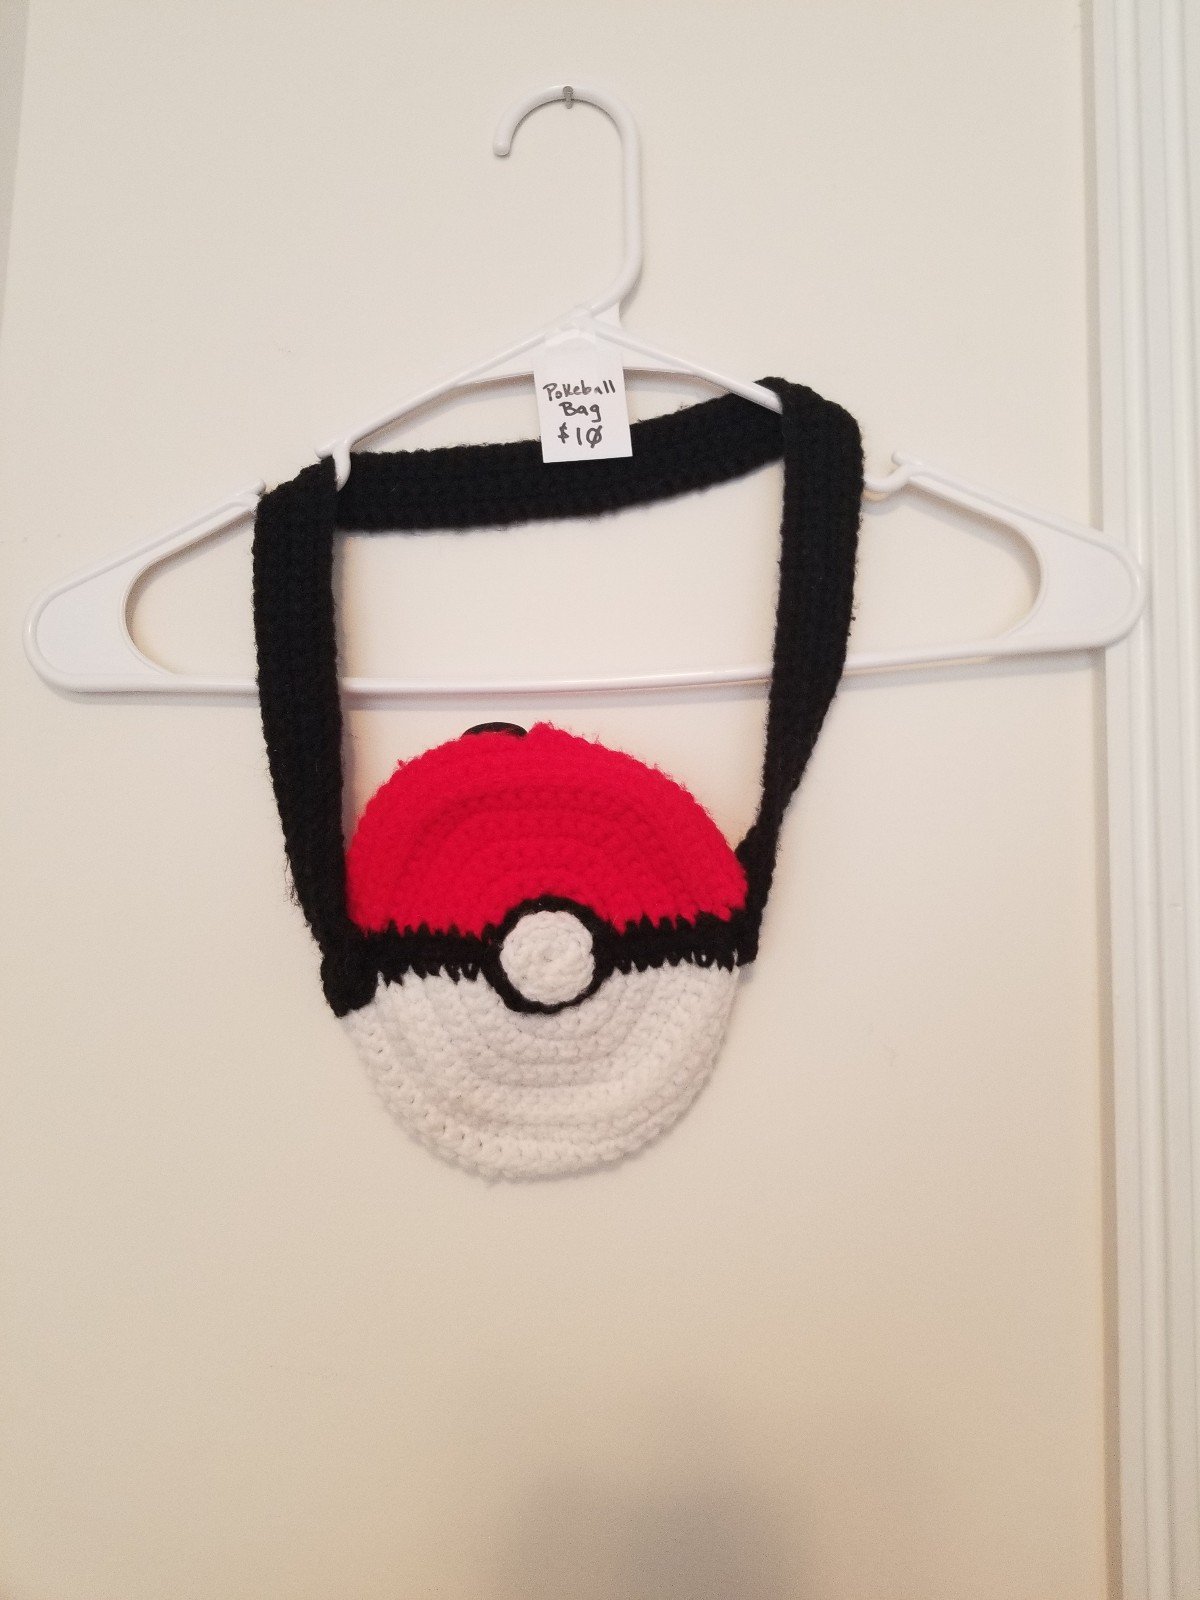 Knitted Pokeball Bag DScQIJO8F